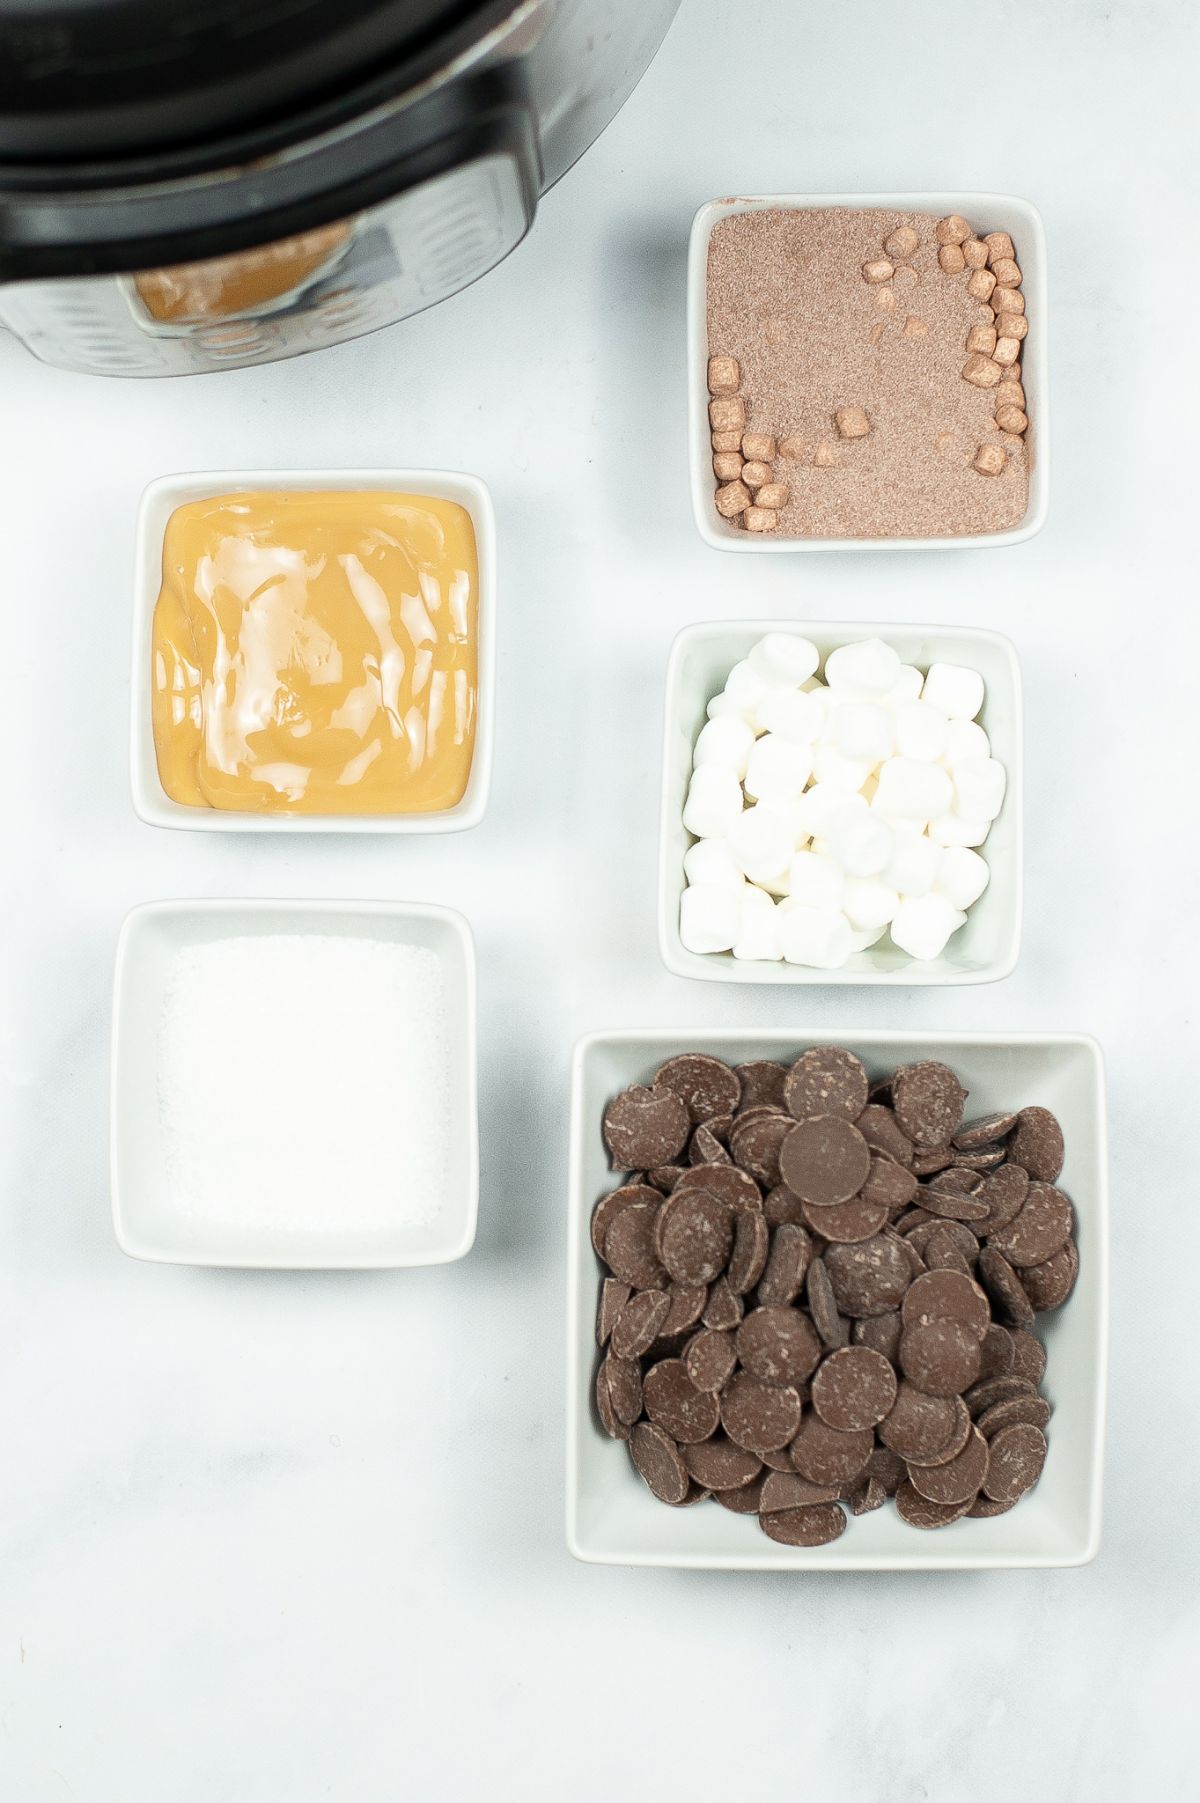 Ingredients used to make Instant Pot Salted Caramel Hot Cocoa Bombs.